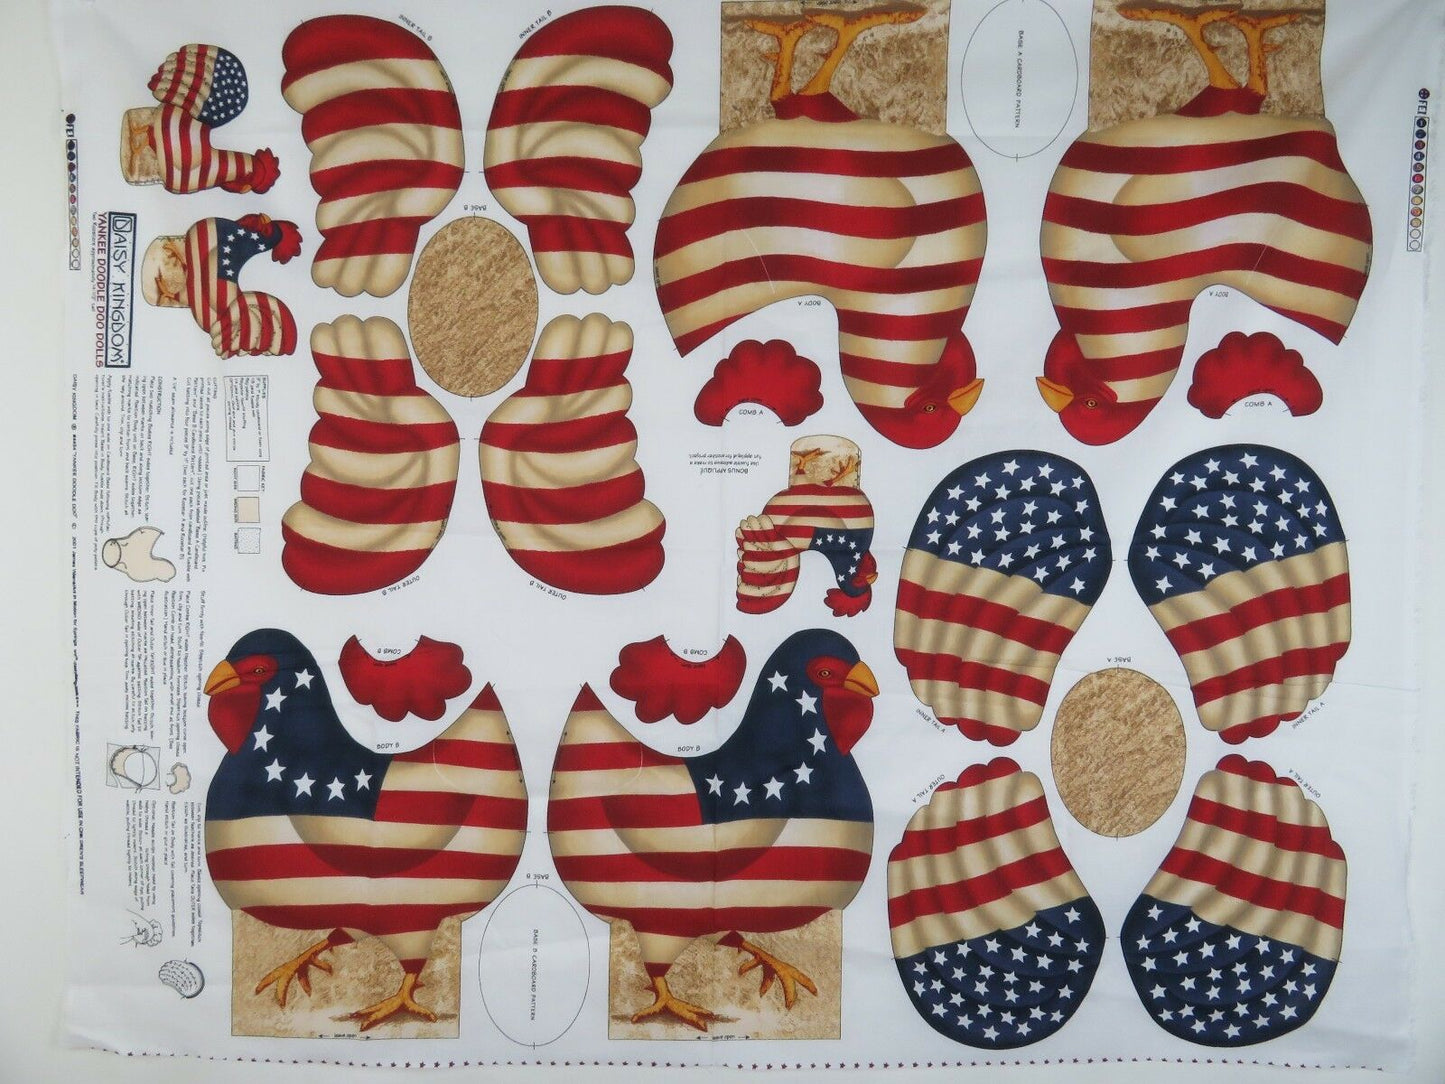 Rooster Dolls Cut Sew Fabric Panel Patriotic Yankee Doodle Daisy Kingdom July 4 - At Grandma's Table